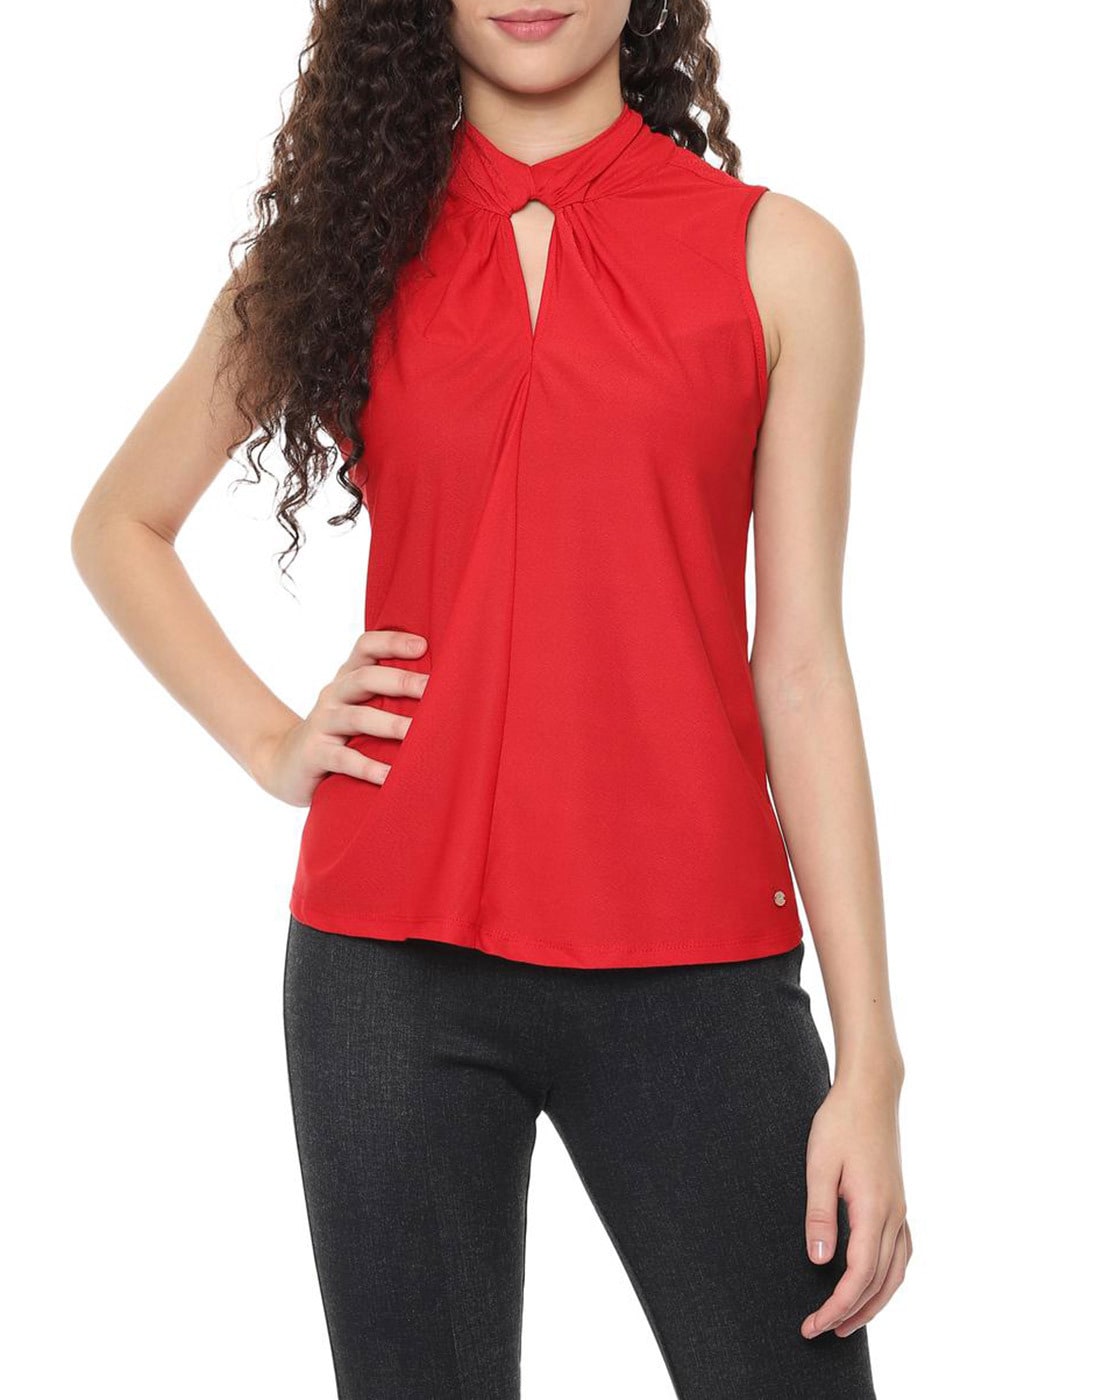 red tops for ladies